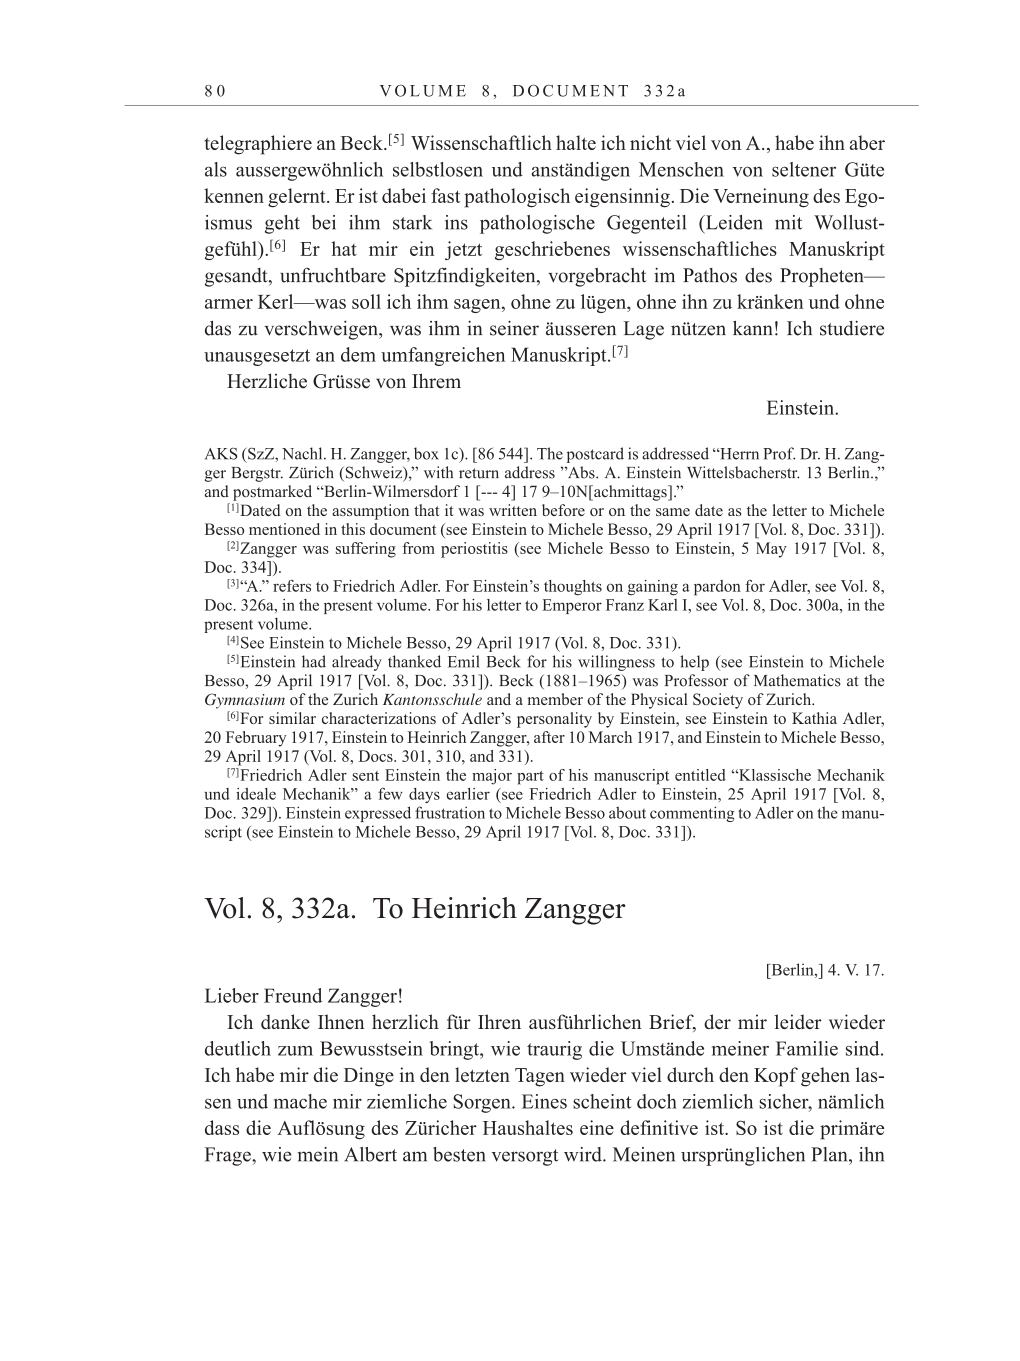 Volume 10: The Berlin Years: Correspondence May-December 1920 / Supplementary Correspondence 1909-1920 page 80